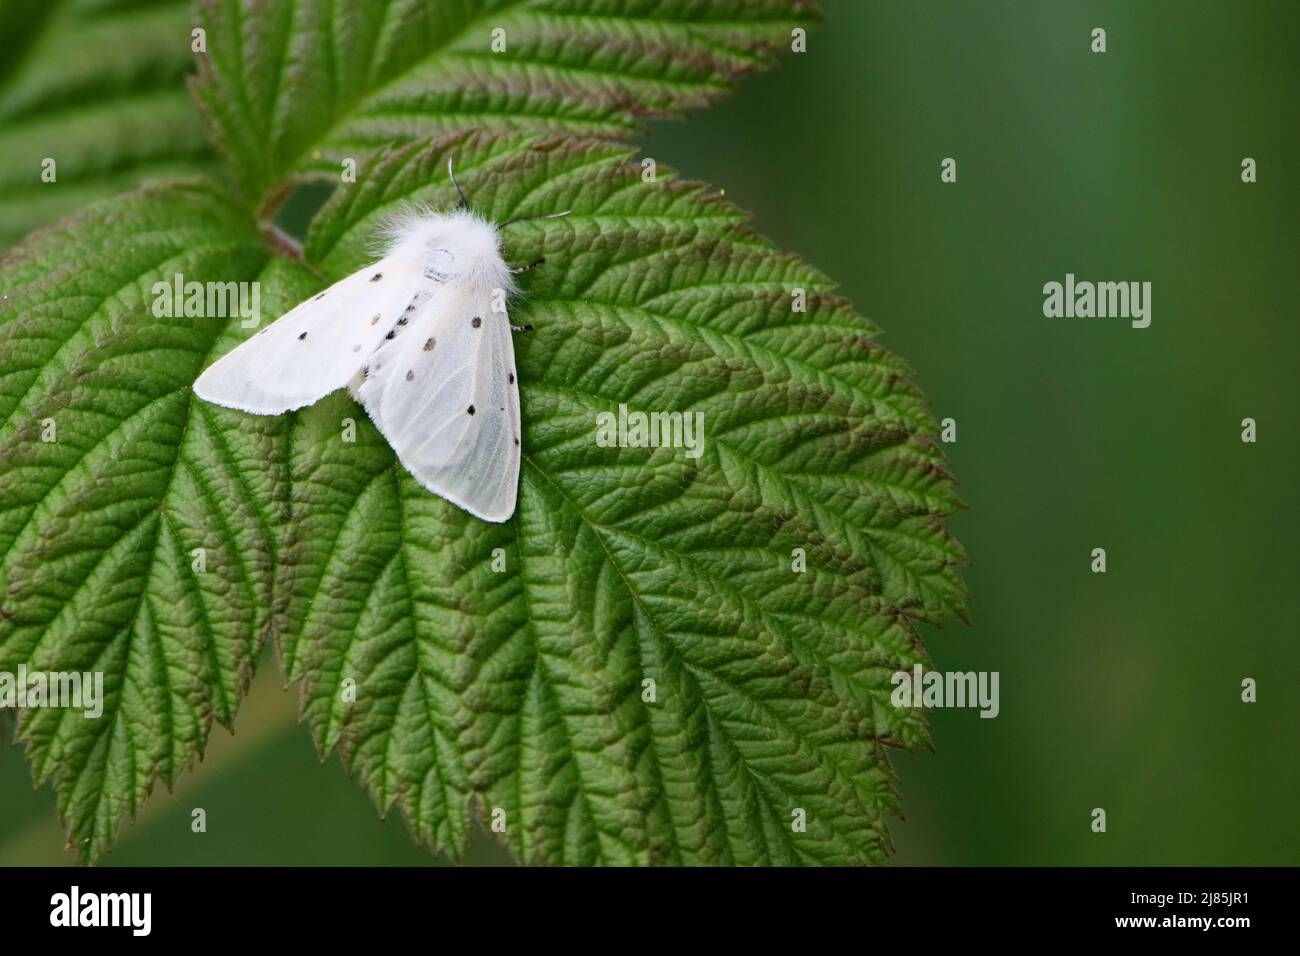 White ermine moth (Spilosoma lubricipeda) on green leaf, white wings with black spots yellow and black badomen under wings, has furry white thorax Stock Photo